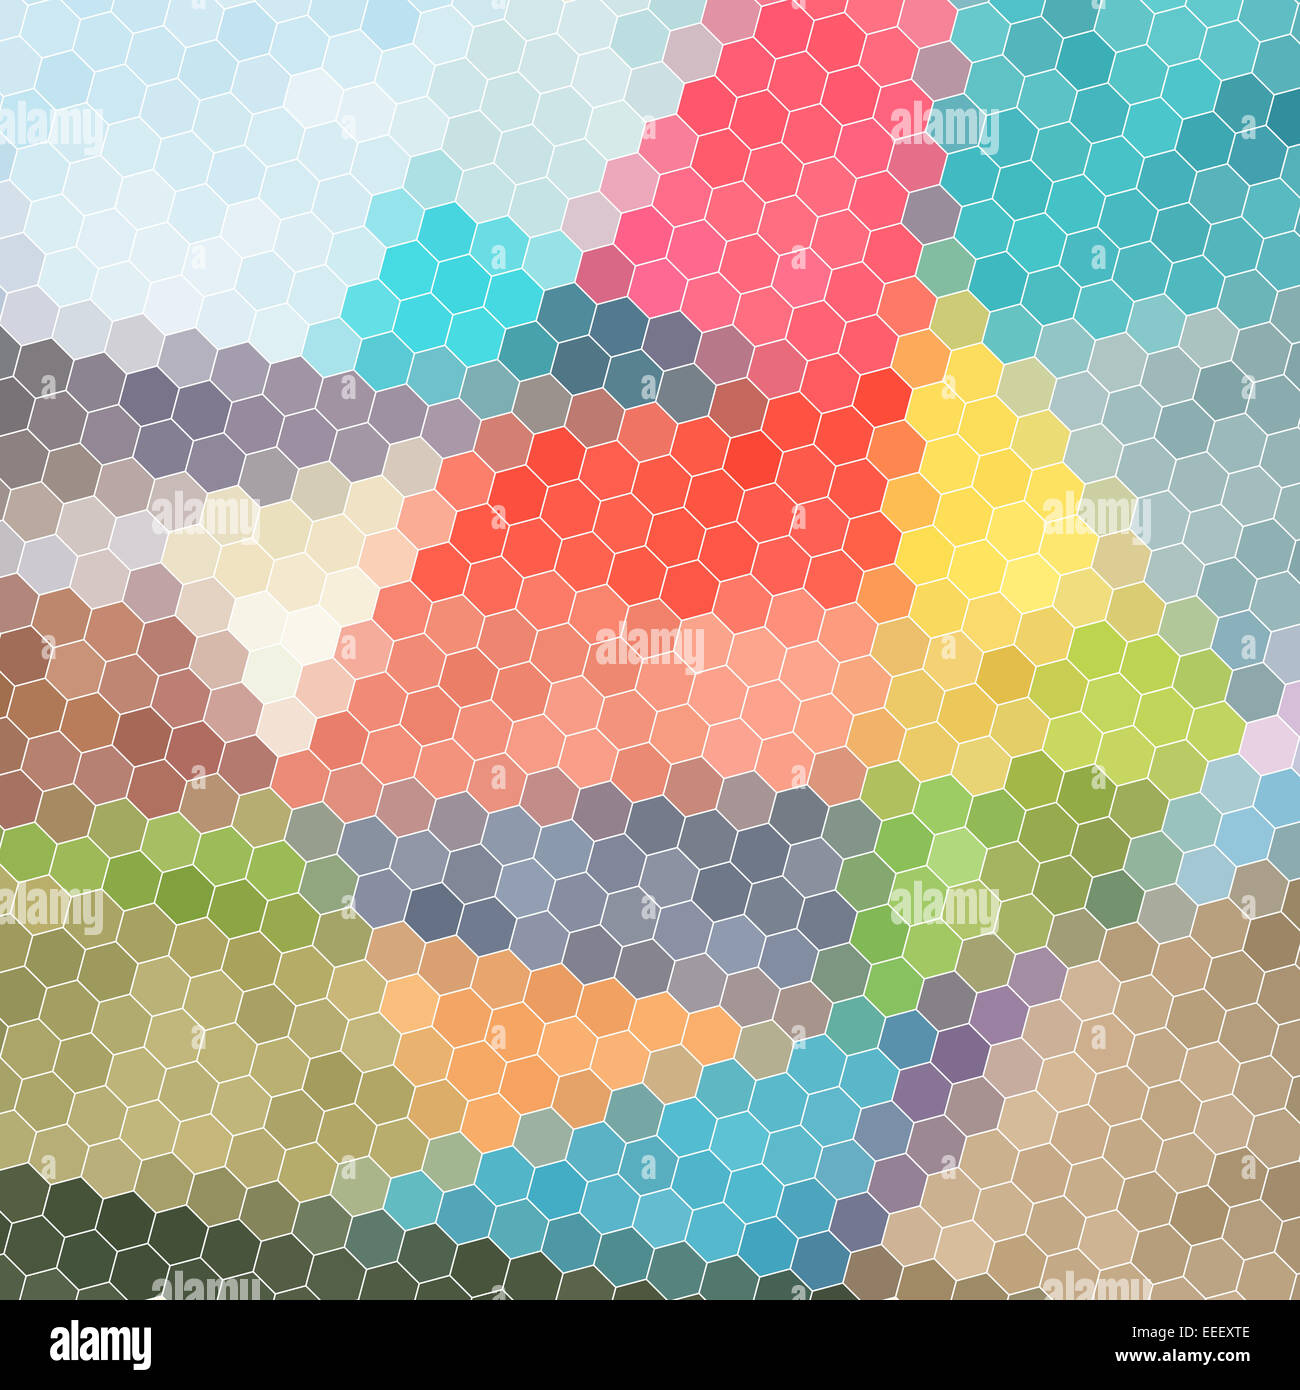 bright multicolored abstract pattern of polygons Stock Photo